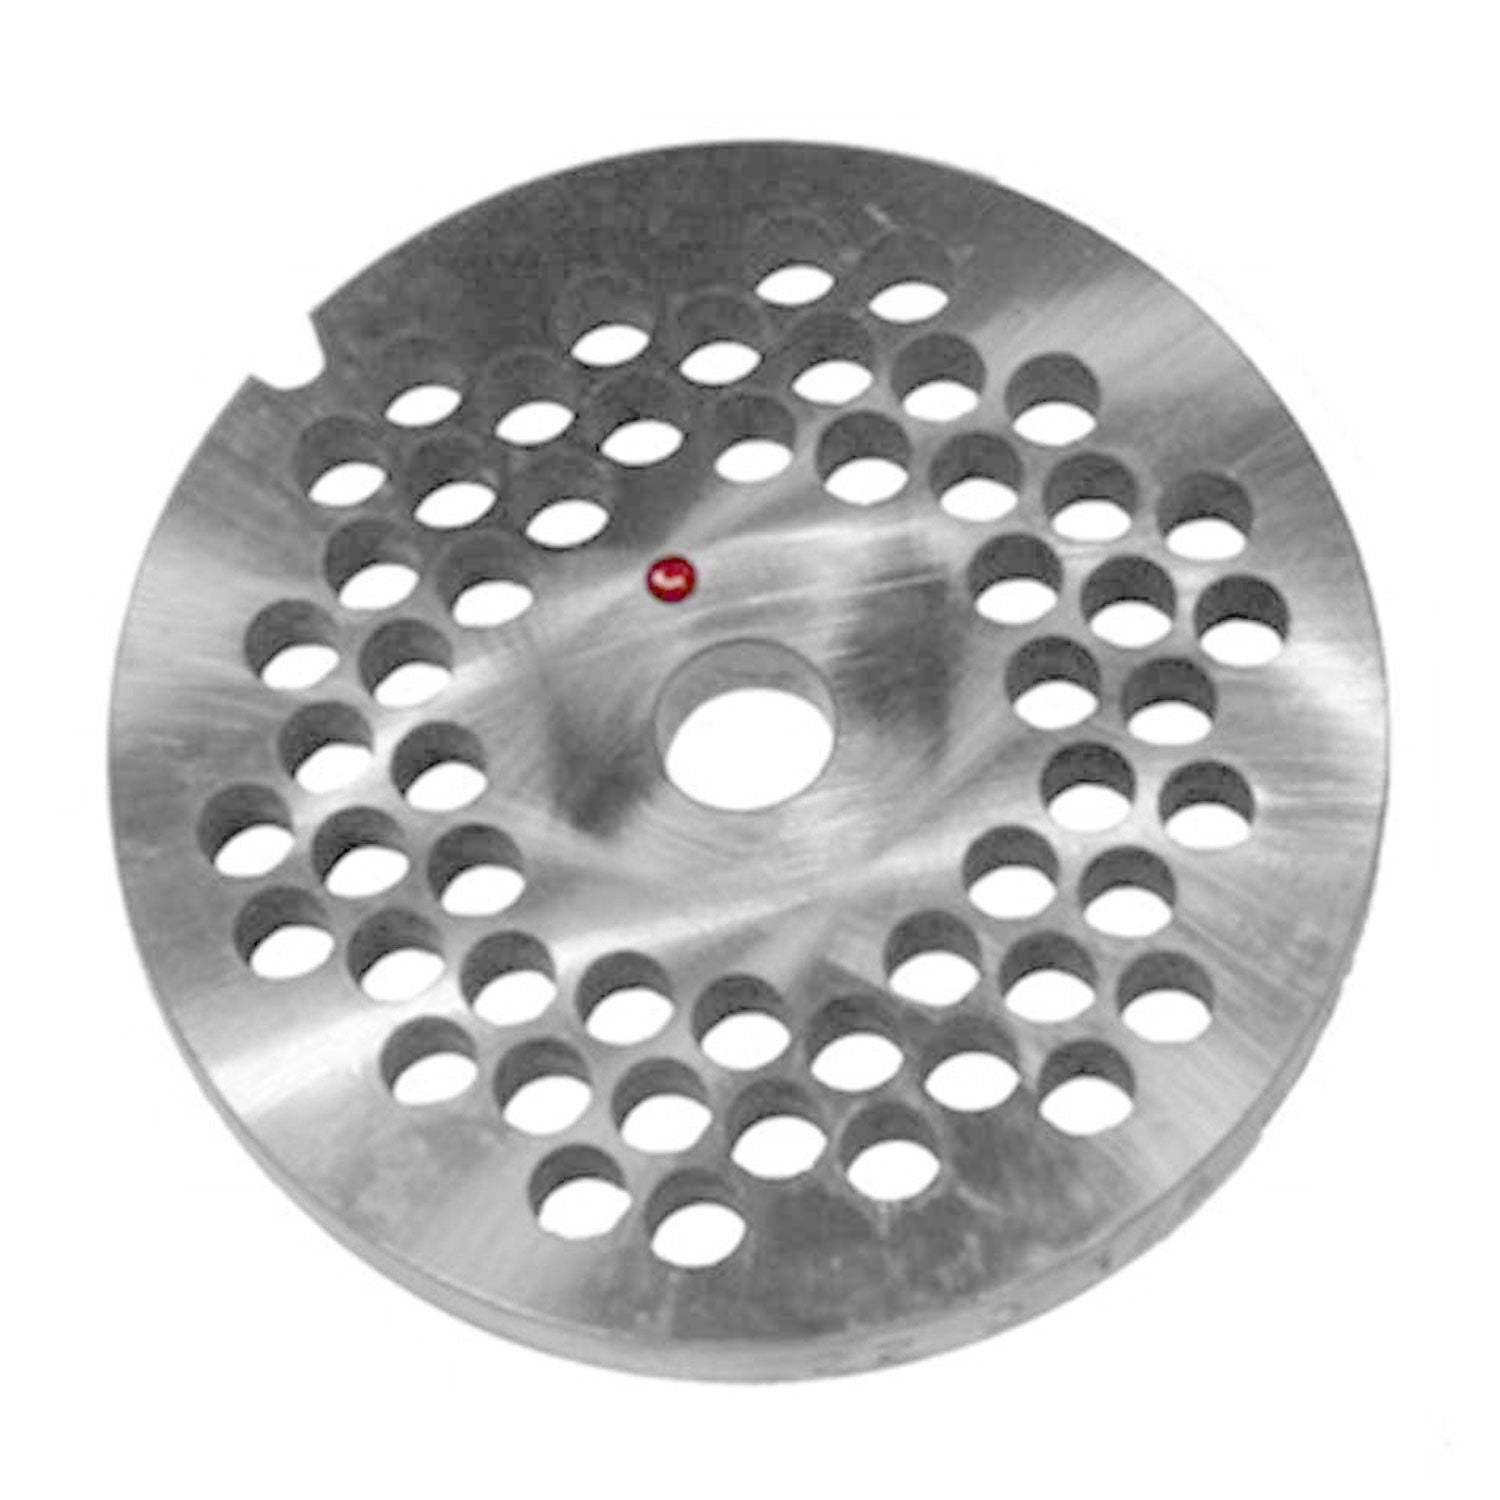 Size 22 DC Reversible Meat Grinder Plate, 1/4